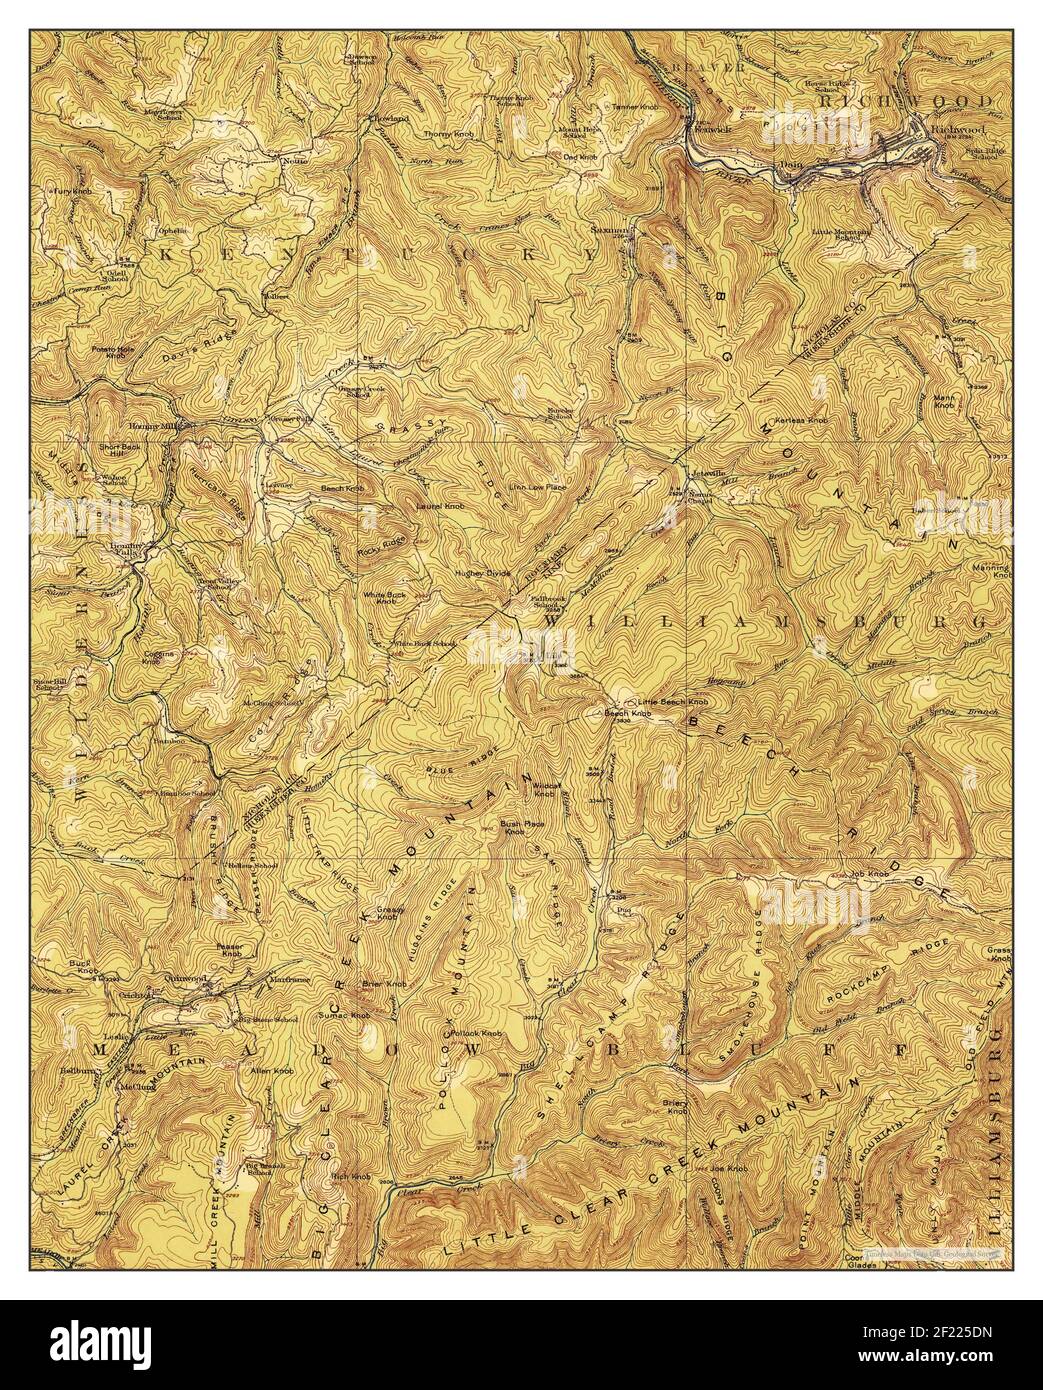 Richwood, West Virginia, map 1923, 1:62500, United States of America by Timeless Maps, data U.S. Geological Survey Stock Photo